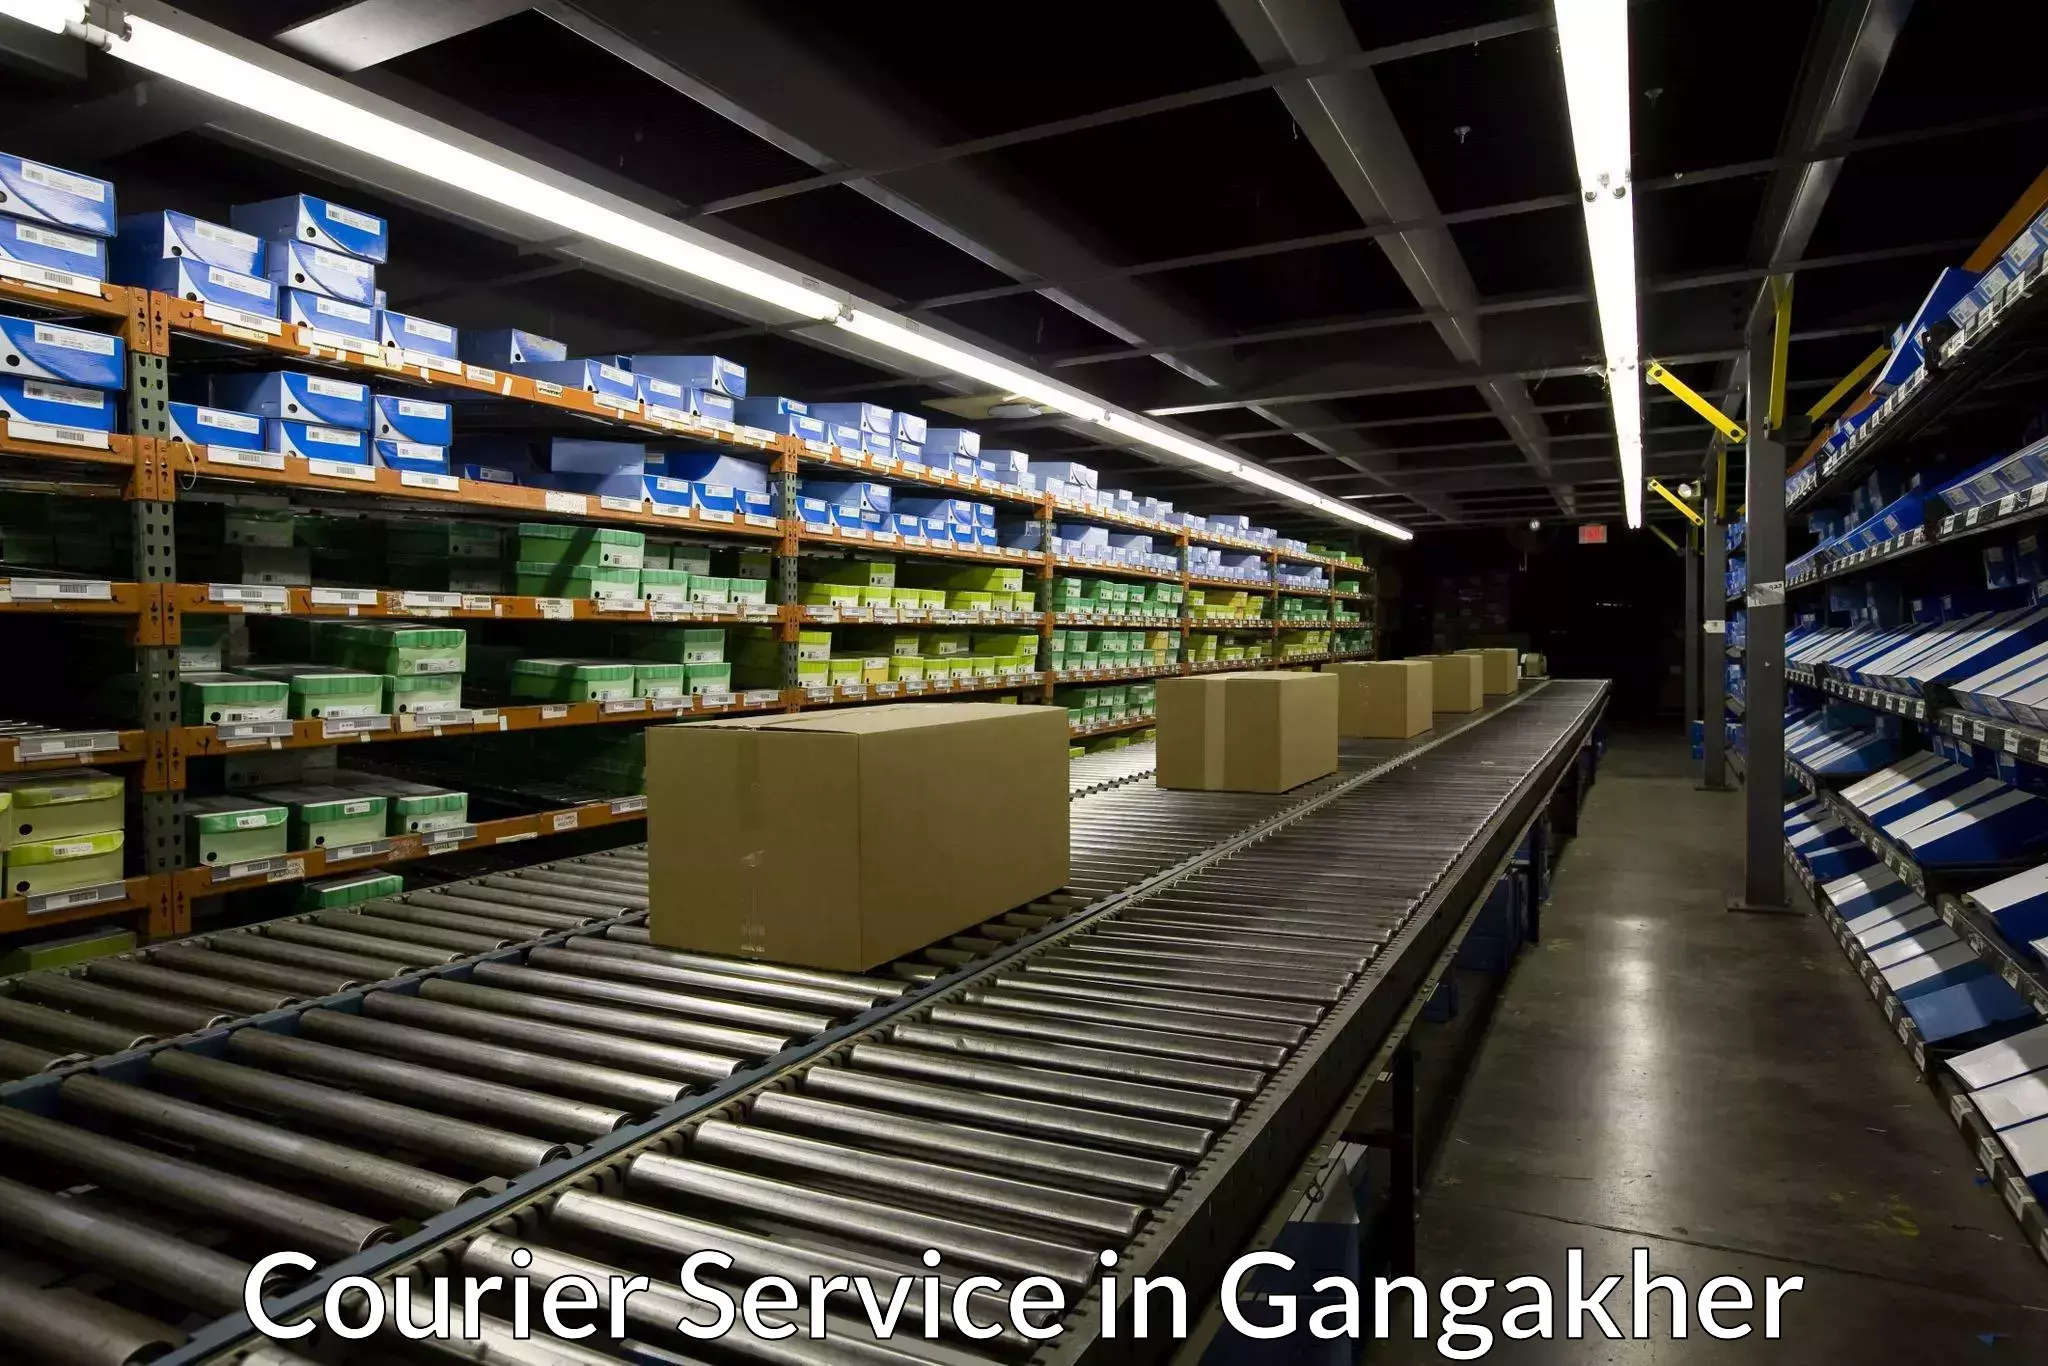 Customer-oriented courier services in Gangakher